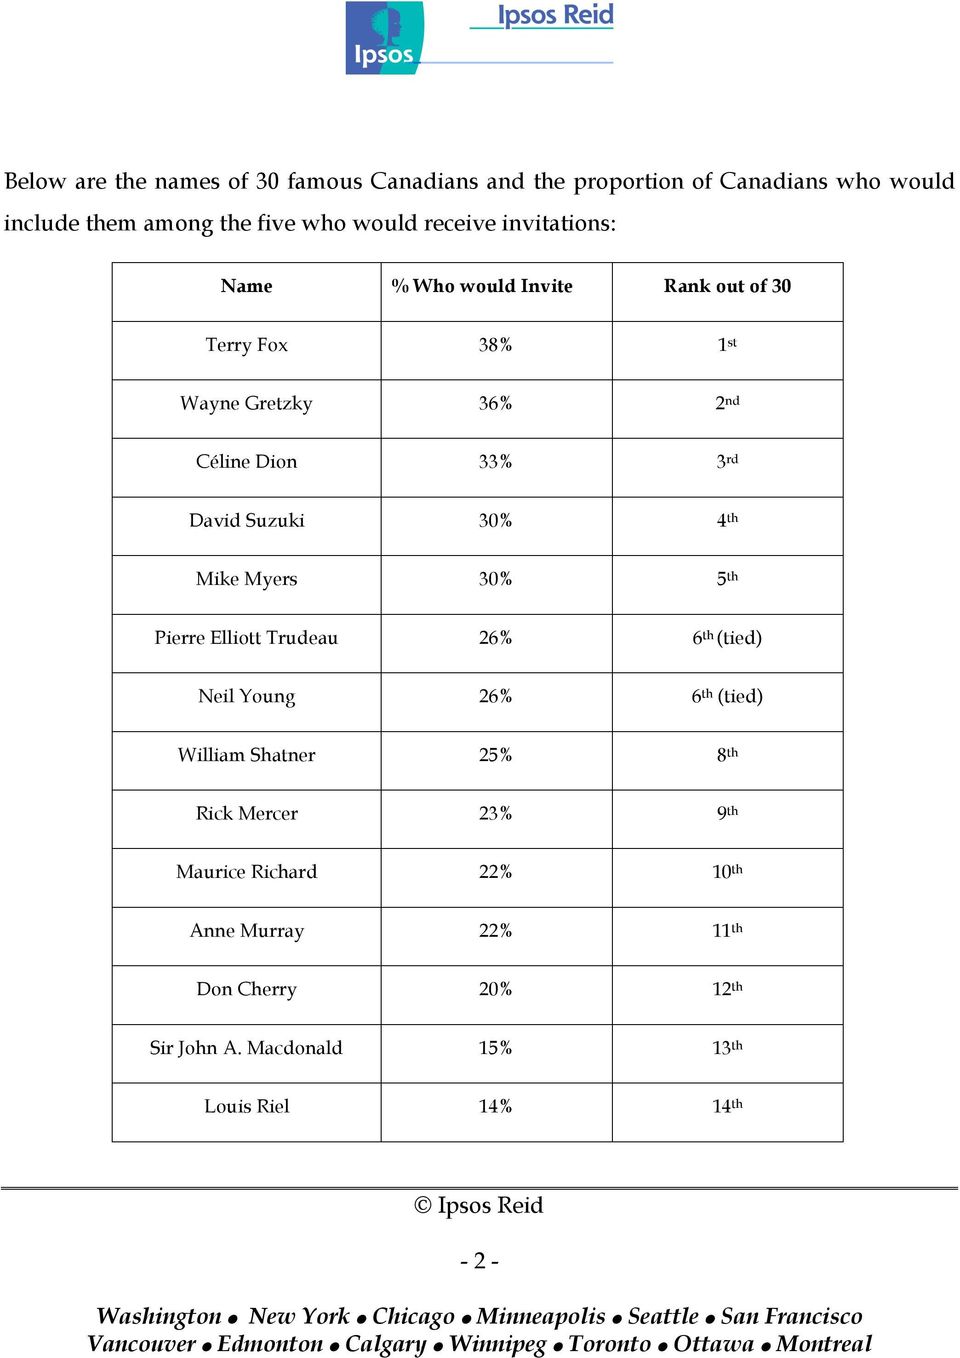 4 th Mike Myers 30% 5 th Pierre Elliott Trudeau 26% 6 th (tied) Neil Young 26% 6 th (tied) William Shatner 25% 8 th Rick Mercer 23%